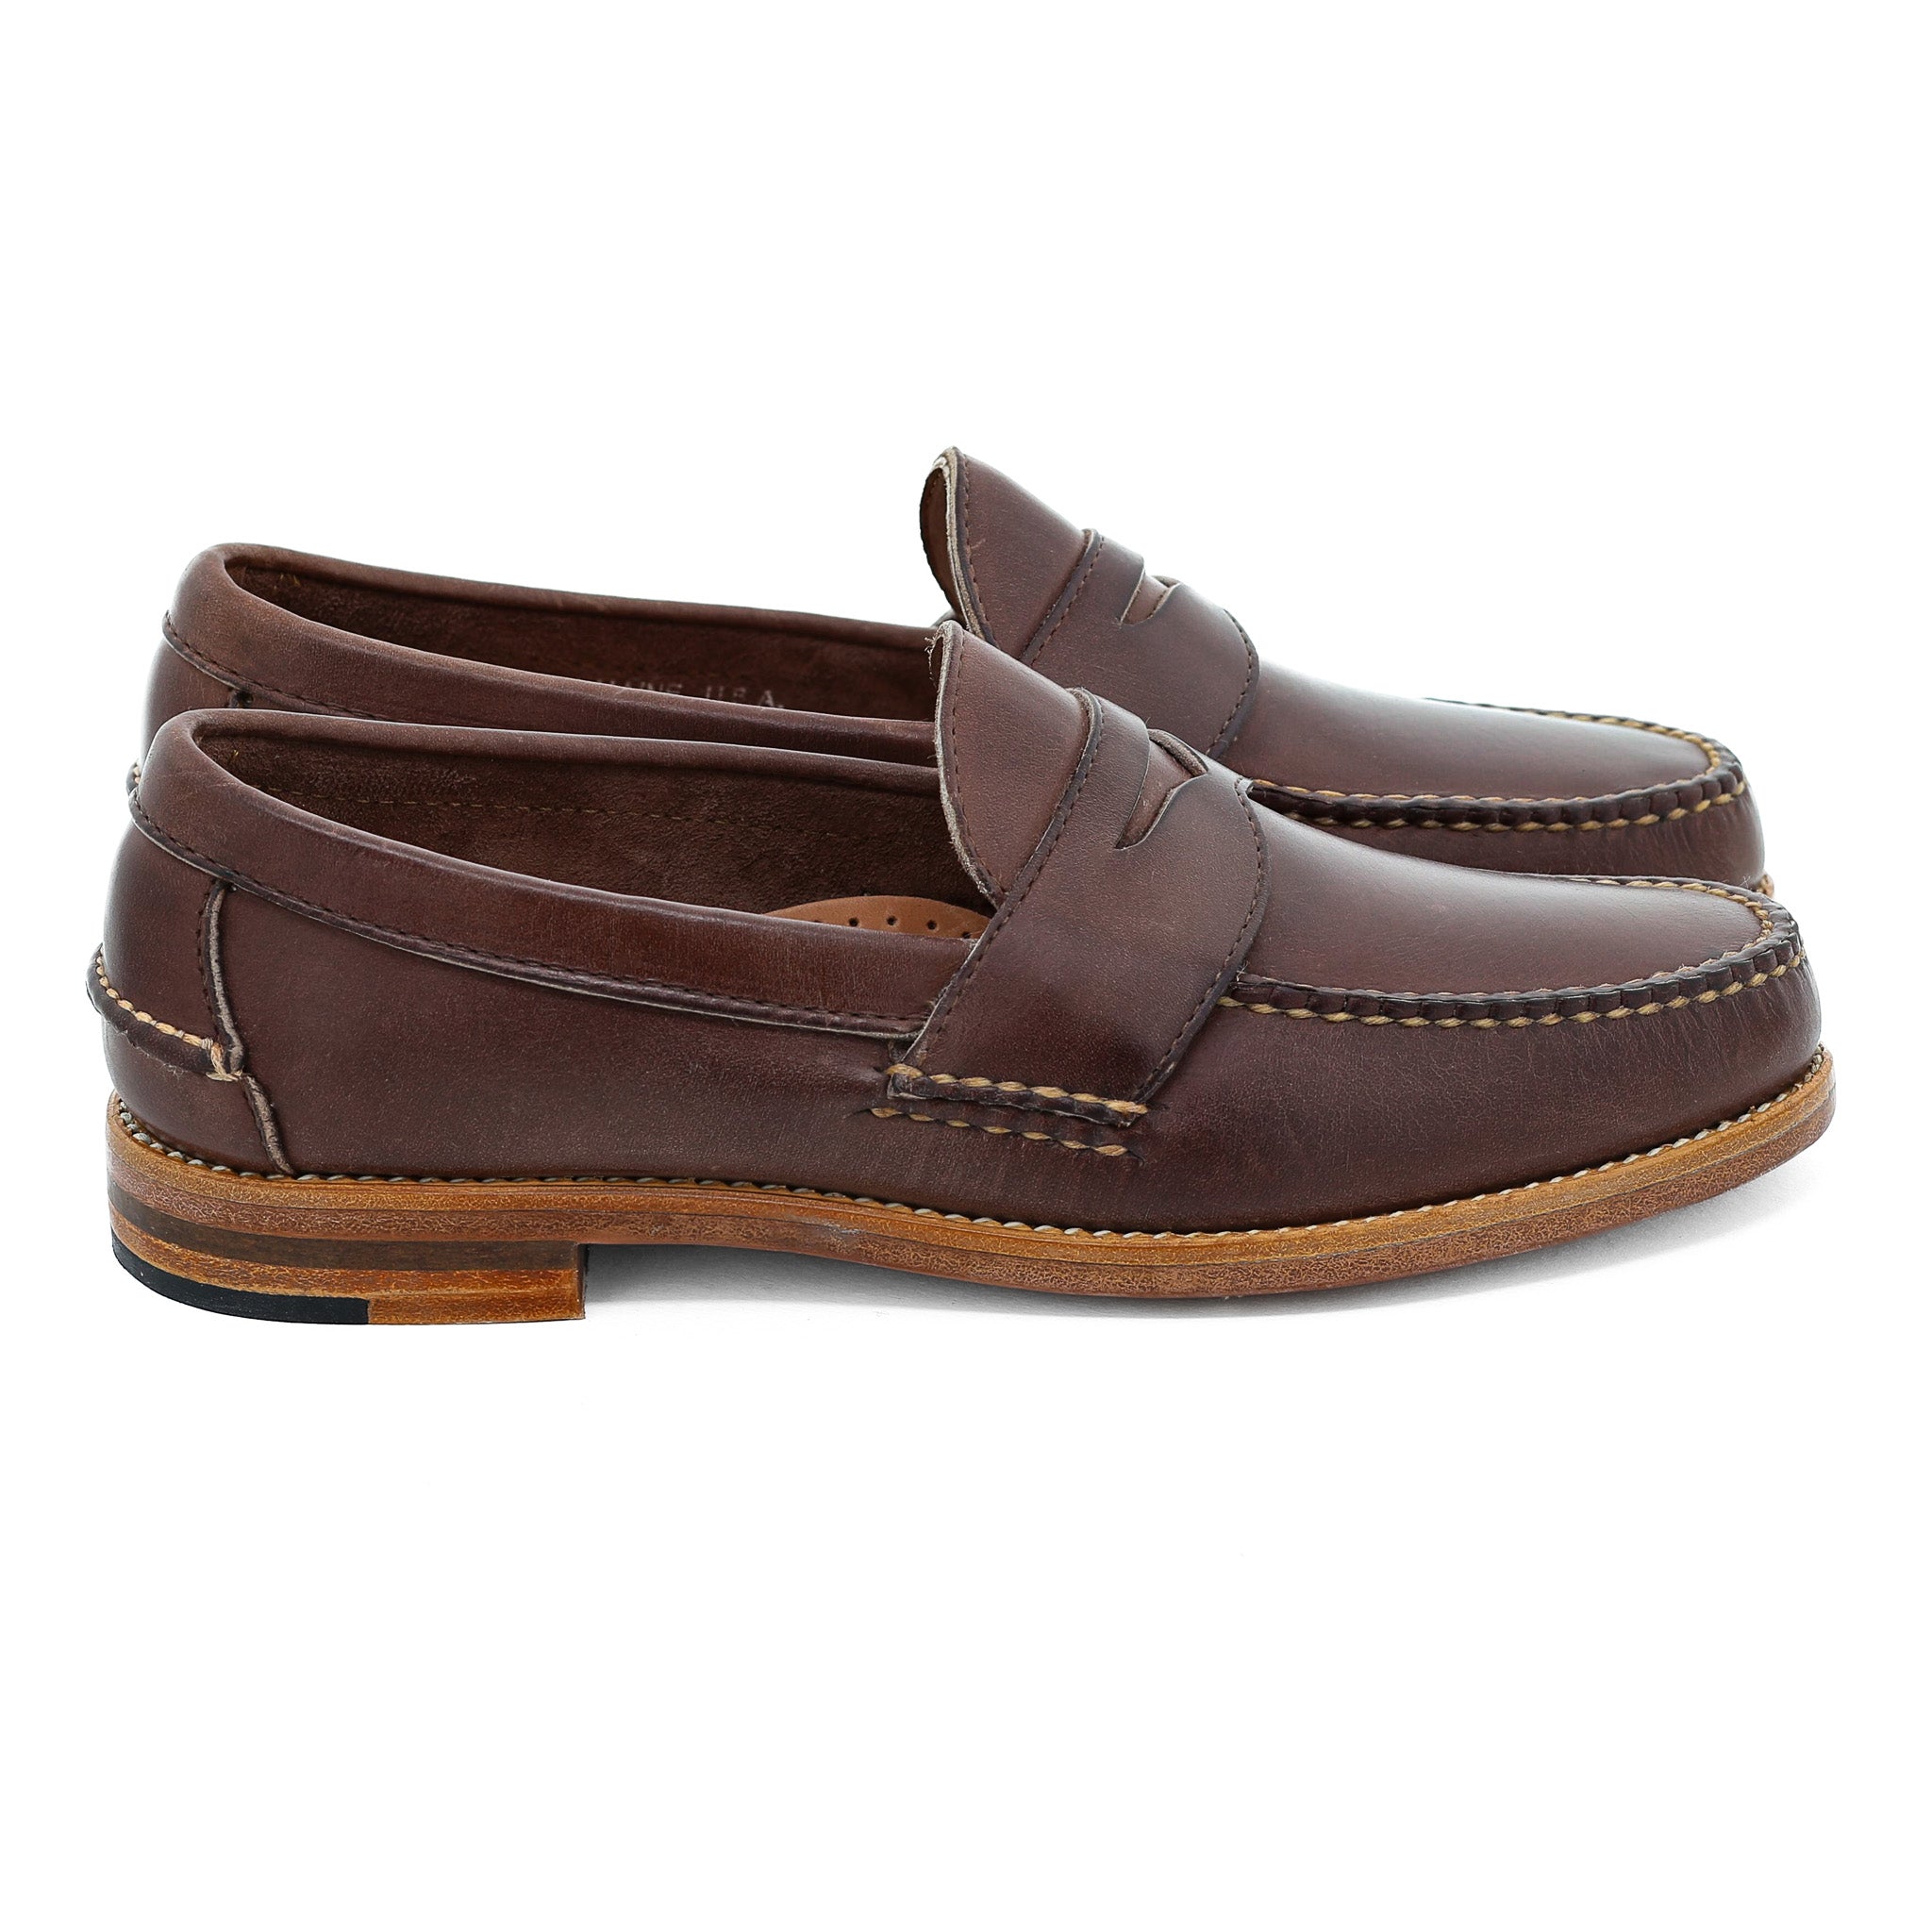 Pinch Penny Loafer - Dark Brown | Rancourt & Co. | Men's Boots and Shoes